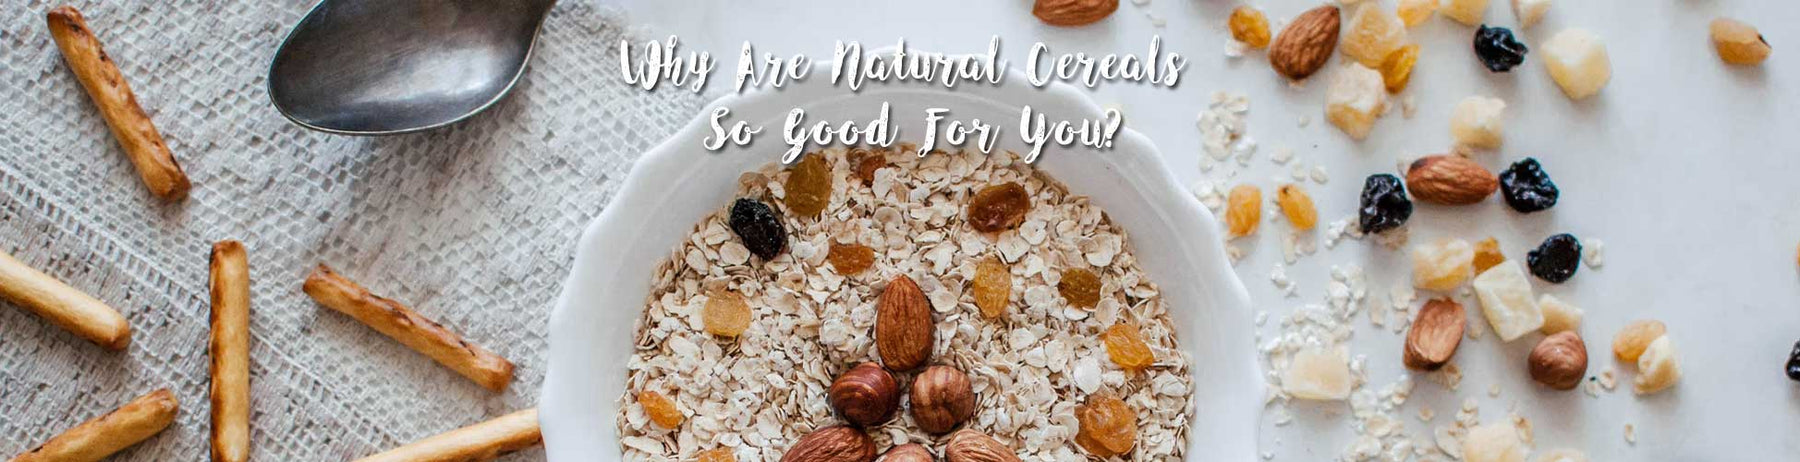 Why Are Natural Cereals So Good For You